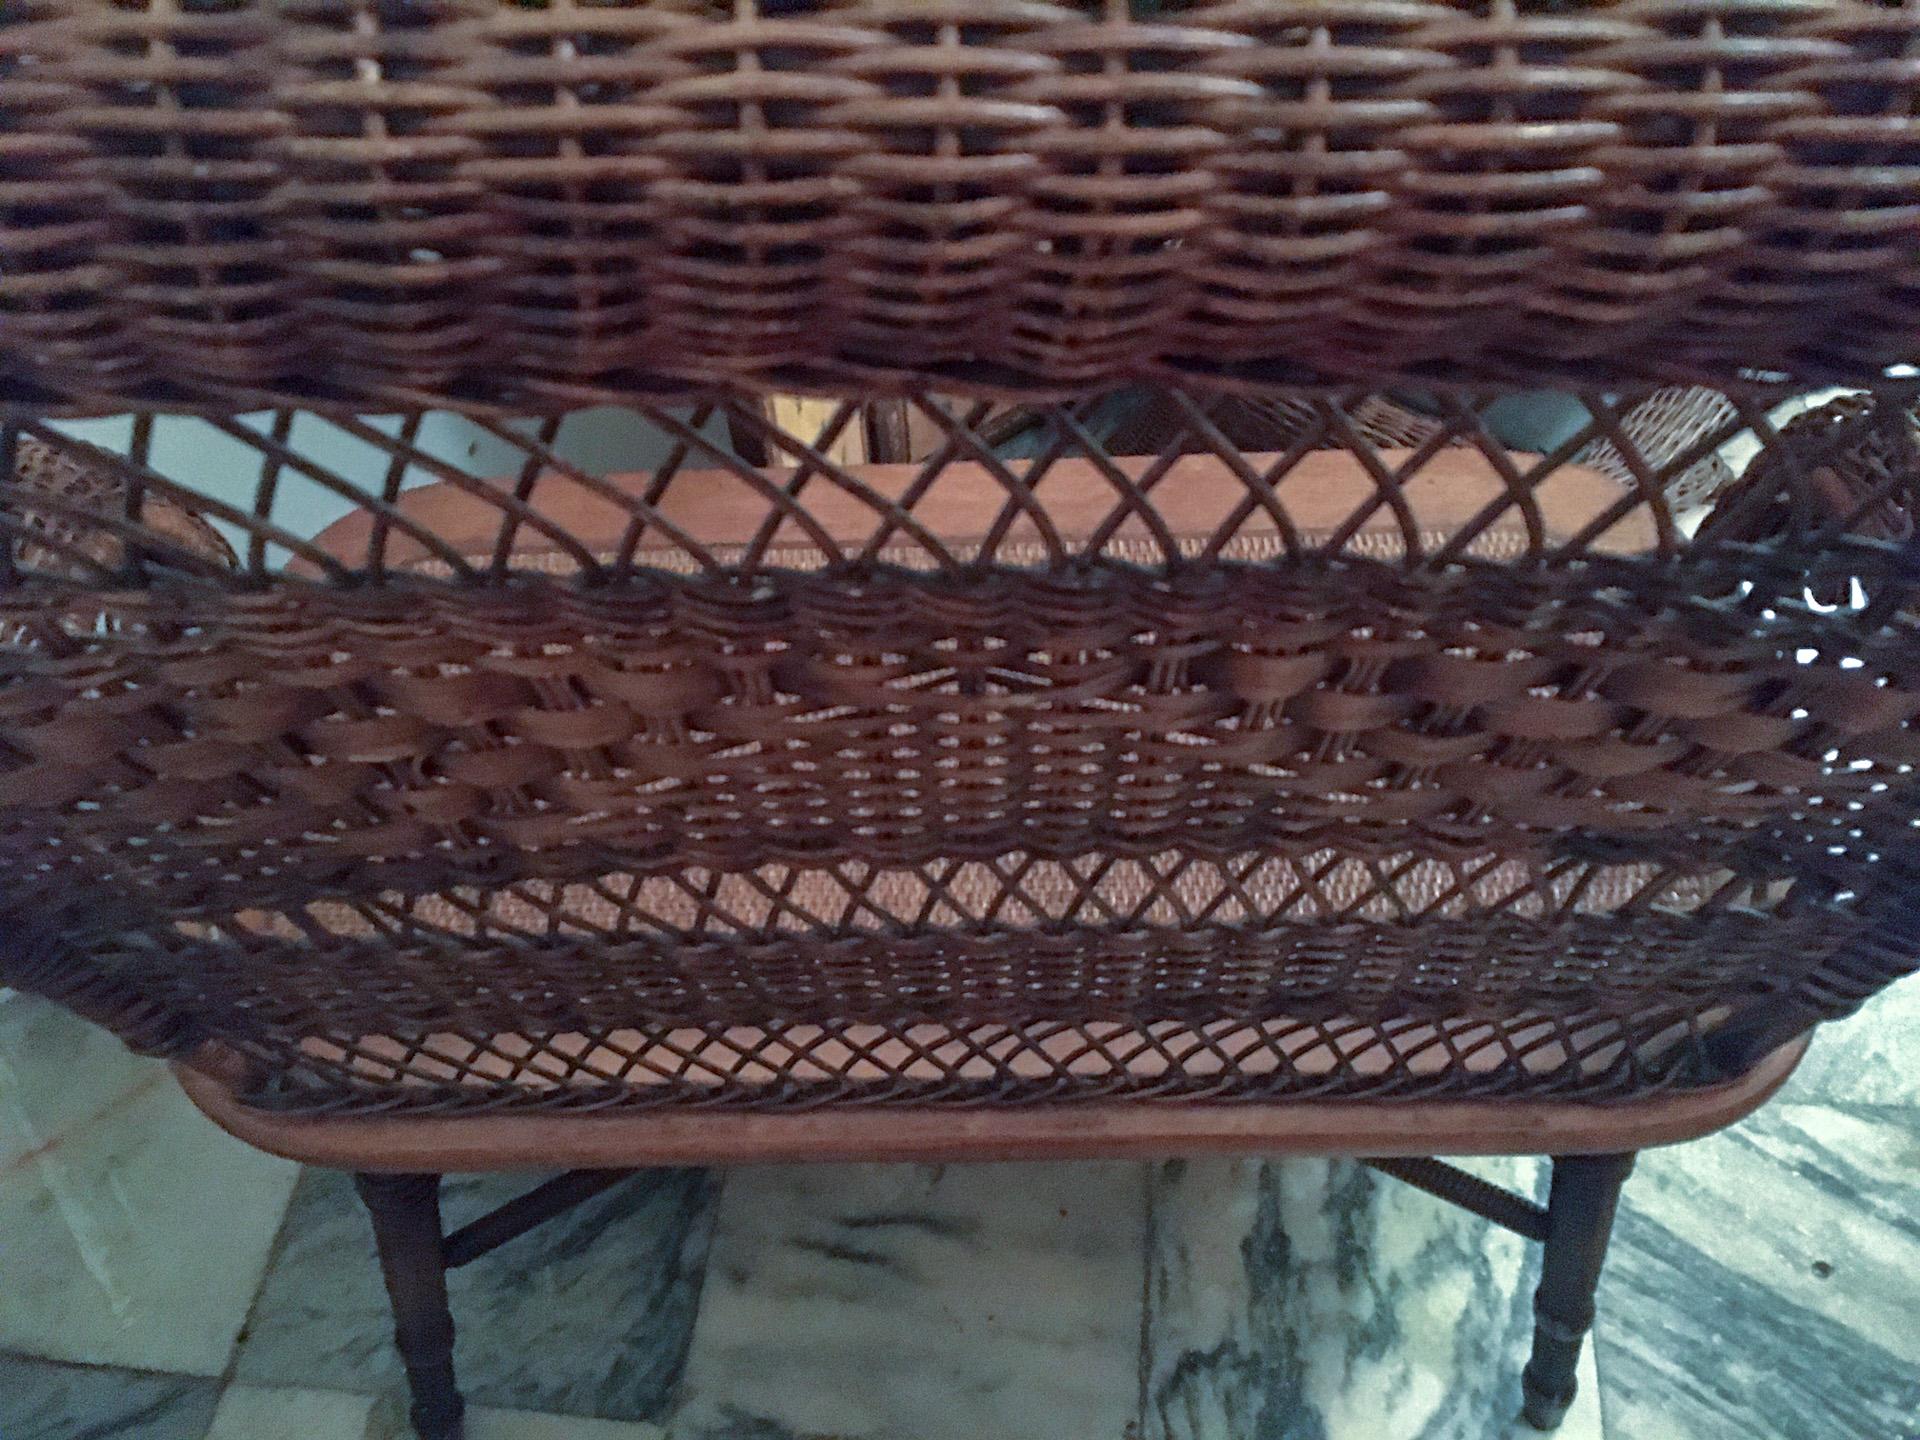 Antique Wicker Heywood Wakefield Settee with Original Natural Finish circa 1900 For Sale 1